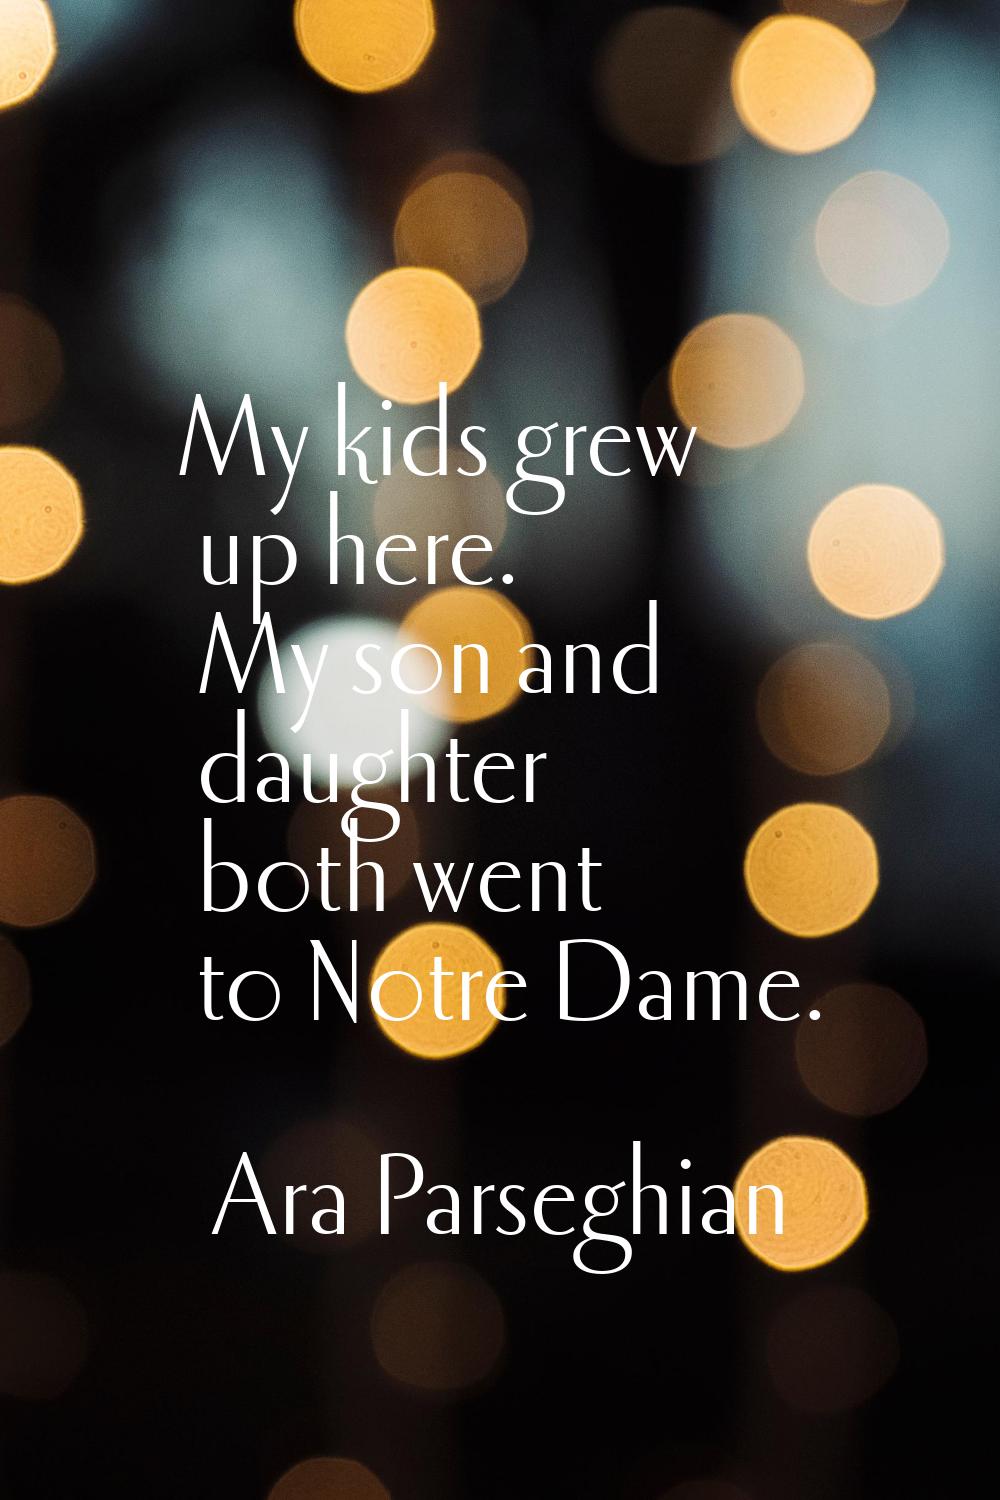 My kids grew up here. My son and daughter both went to Notre Dame.